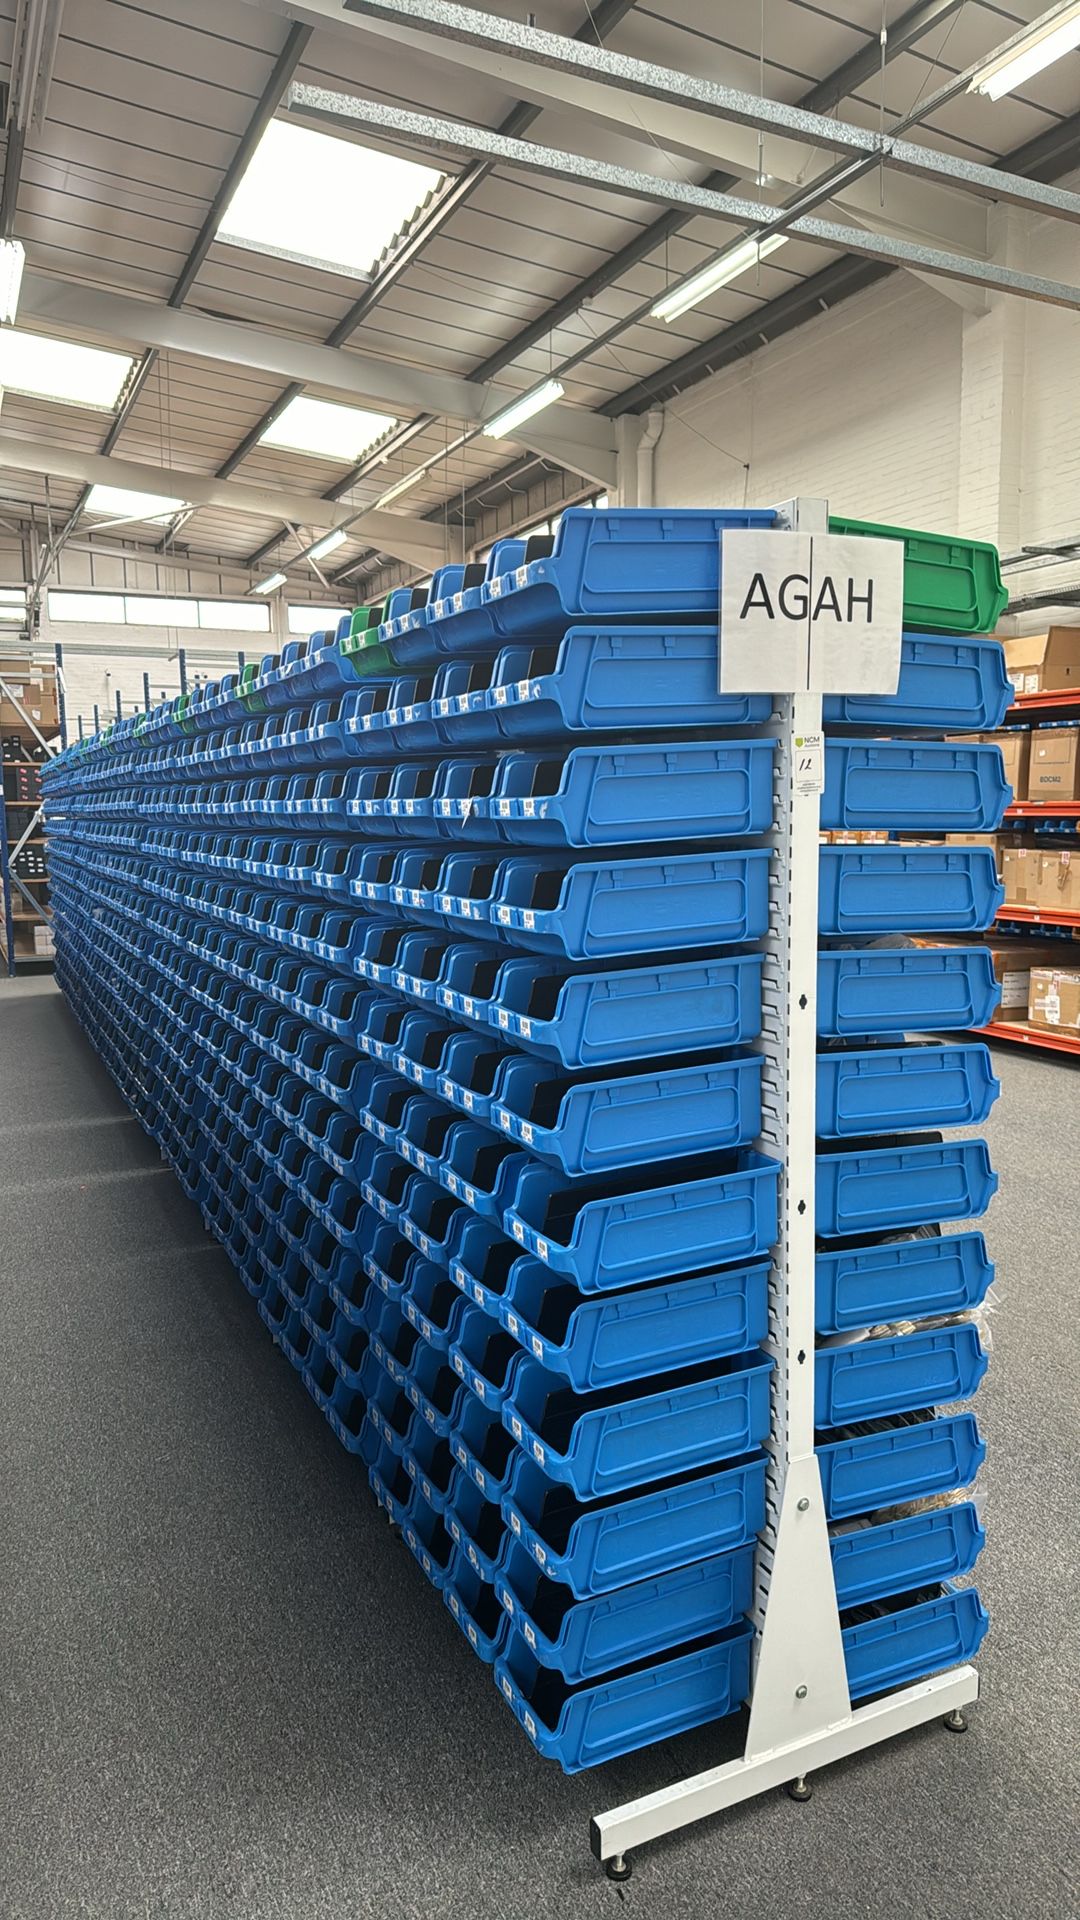 10 x Bays Of Box Storage Stands - Image 5 of 5